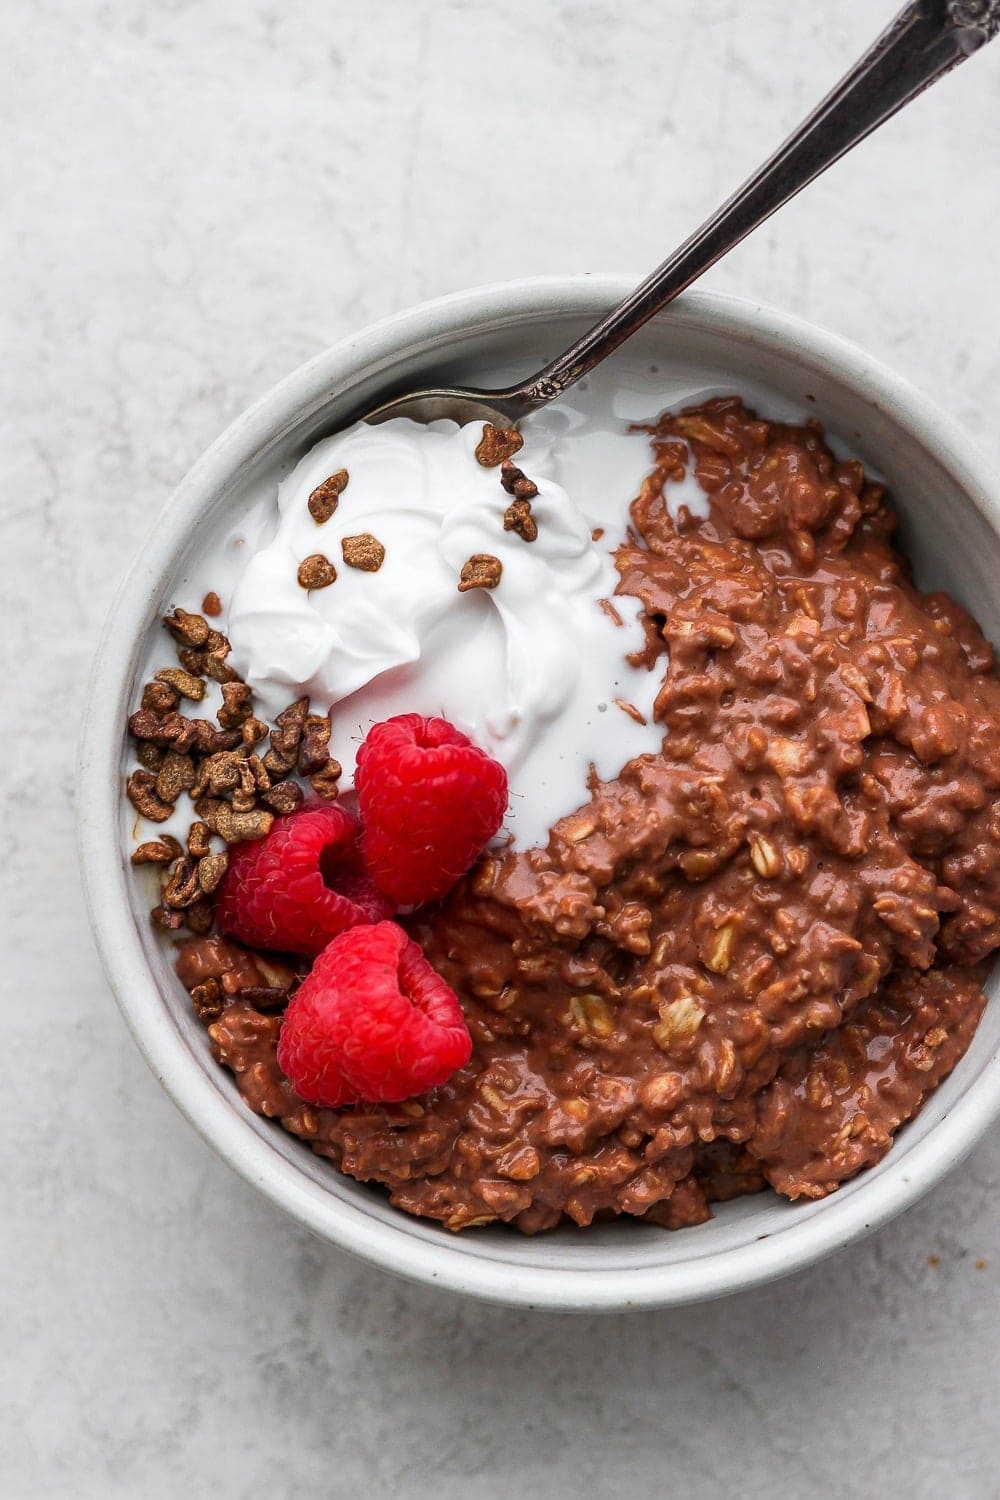 Chocolate Protein Oatmeal (29g protein!)